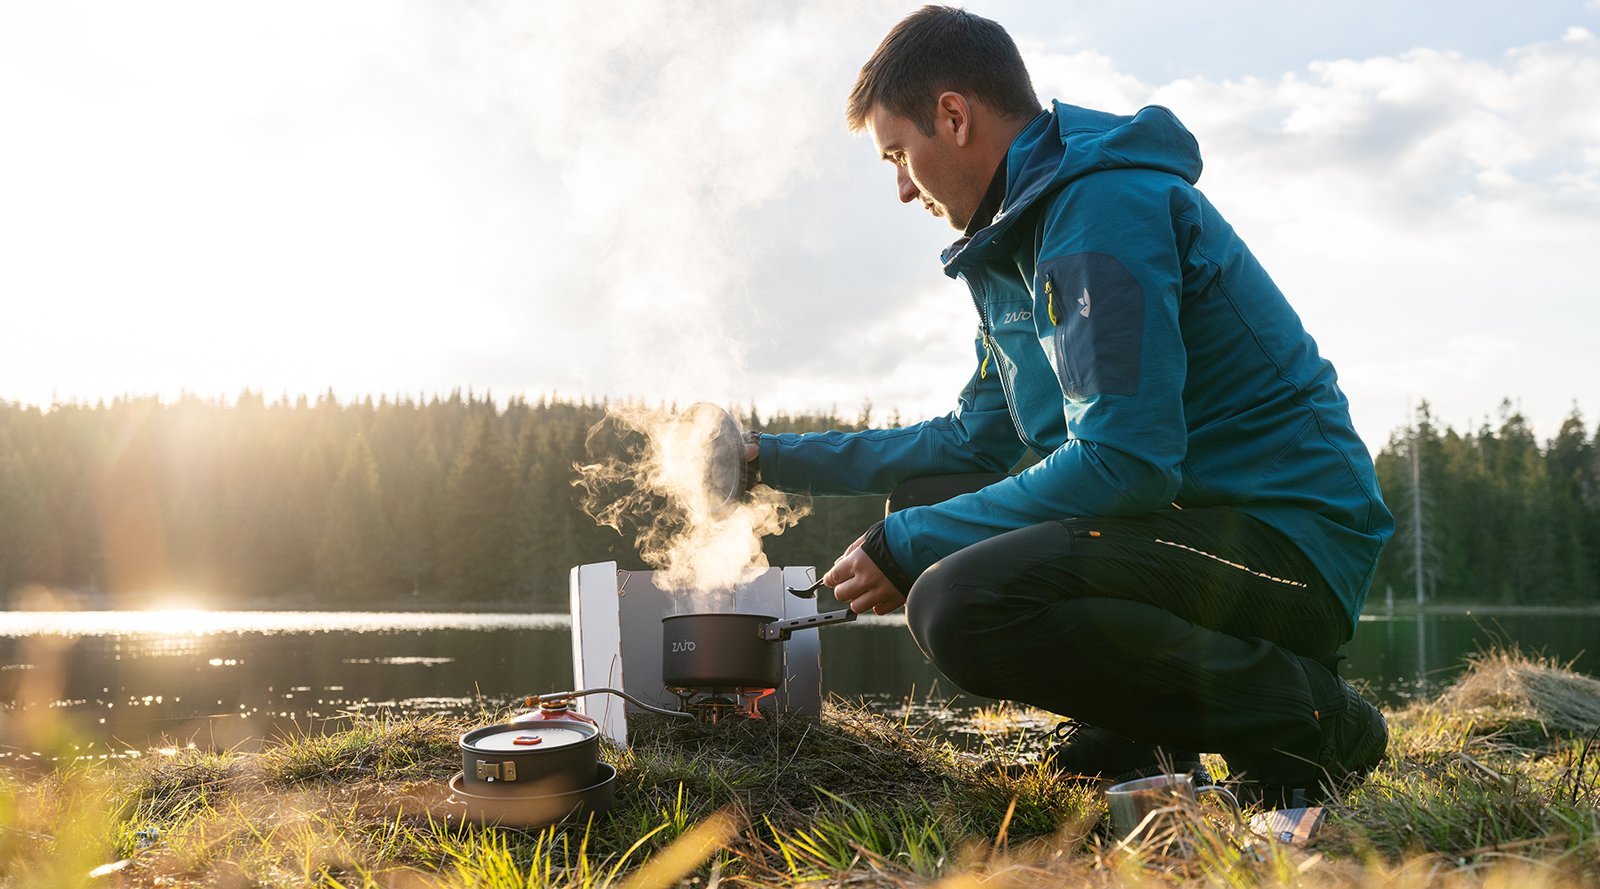 The art of cooking out there: How to cook the perfect meal in the wild?